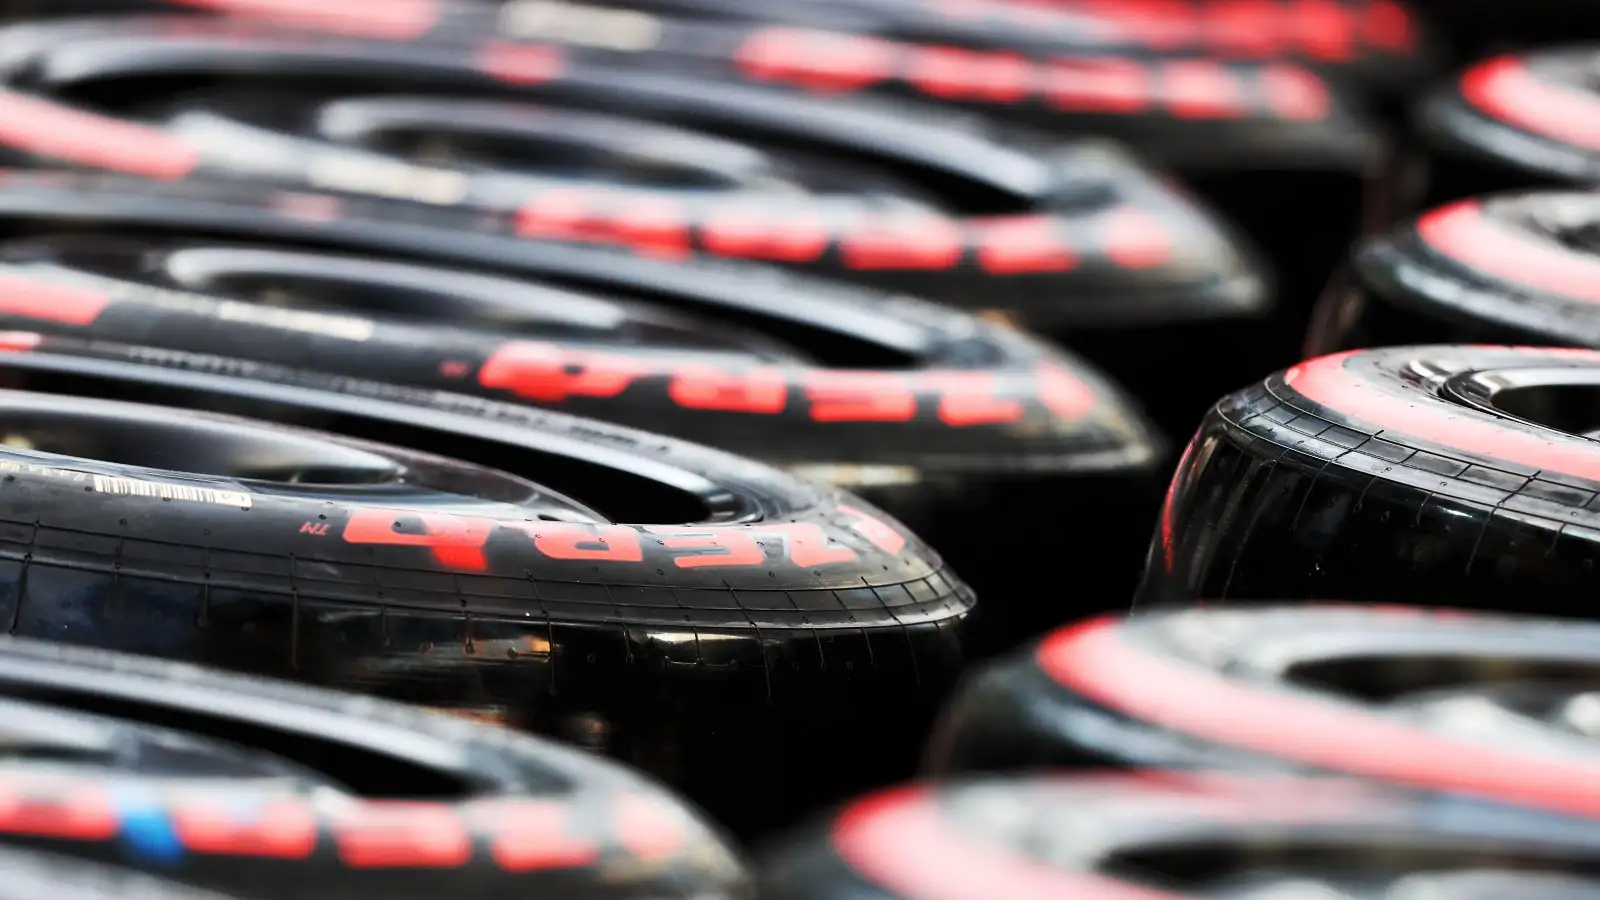 Soft Pirelli tyres in a group. Saudi Arabia, March 2022.